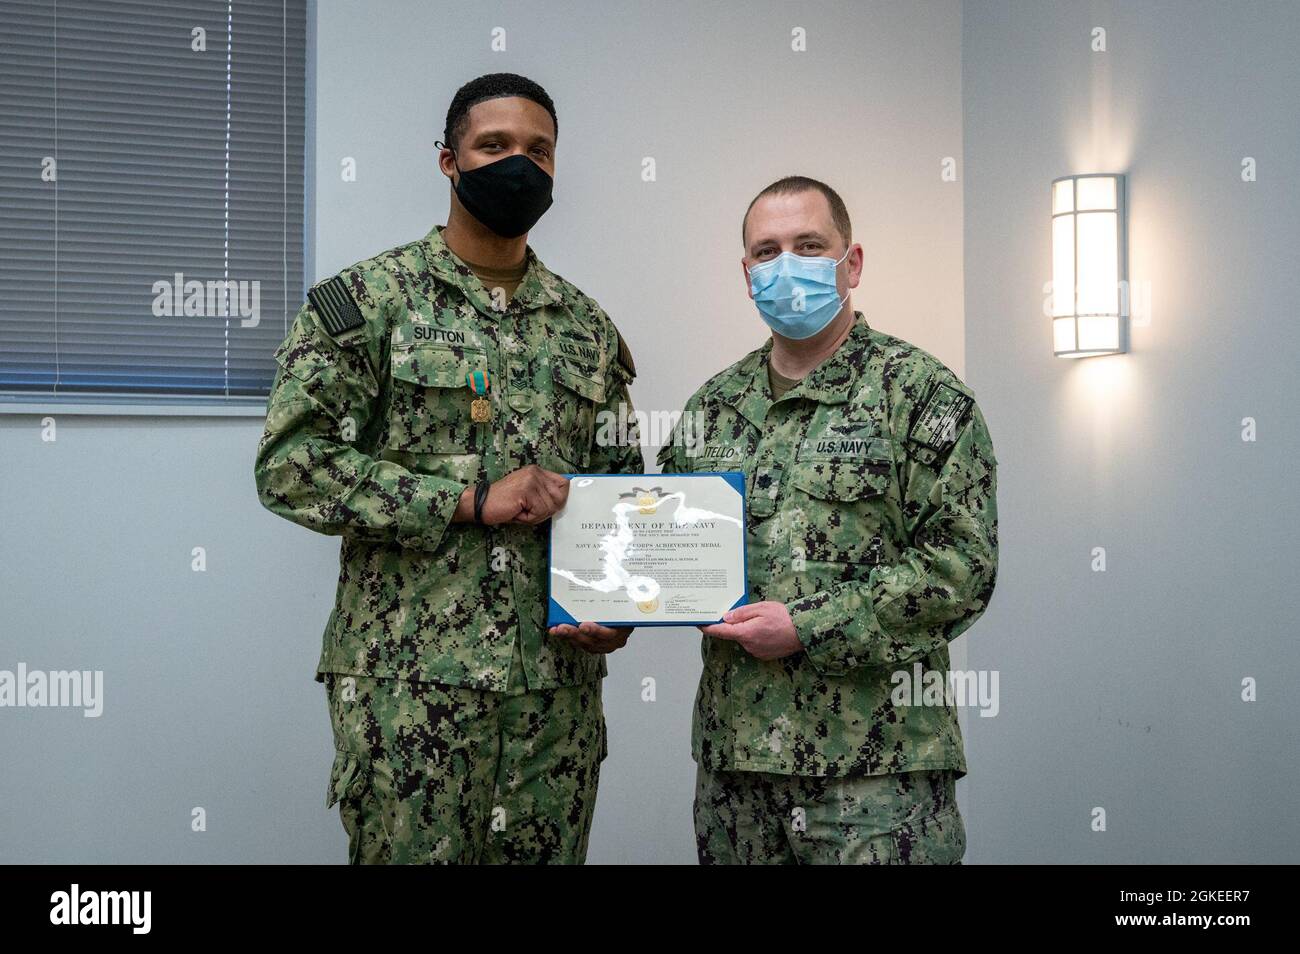 WASHINGTON, DC (March 30, 2021) – Cmdr. Anthony Militello (right), Naval Support Activity Washington executive officer, presents Boatswain’s Mate 1st Class Michael Sutton (left) with the Navy and Marine Corps achievement medal during an end-of-tour award ceremony held in Sutton’s honor. Stock Photo